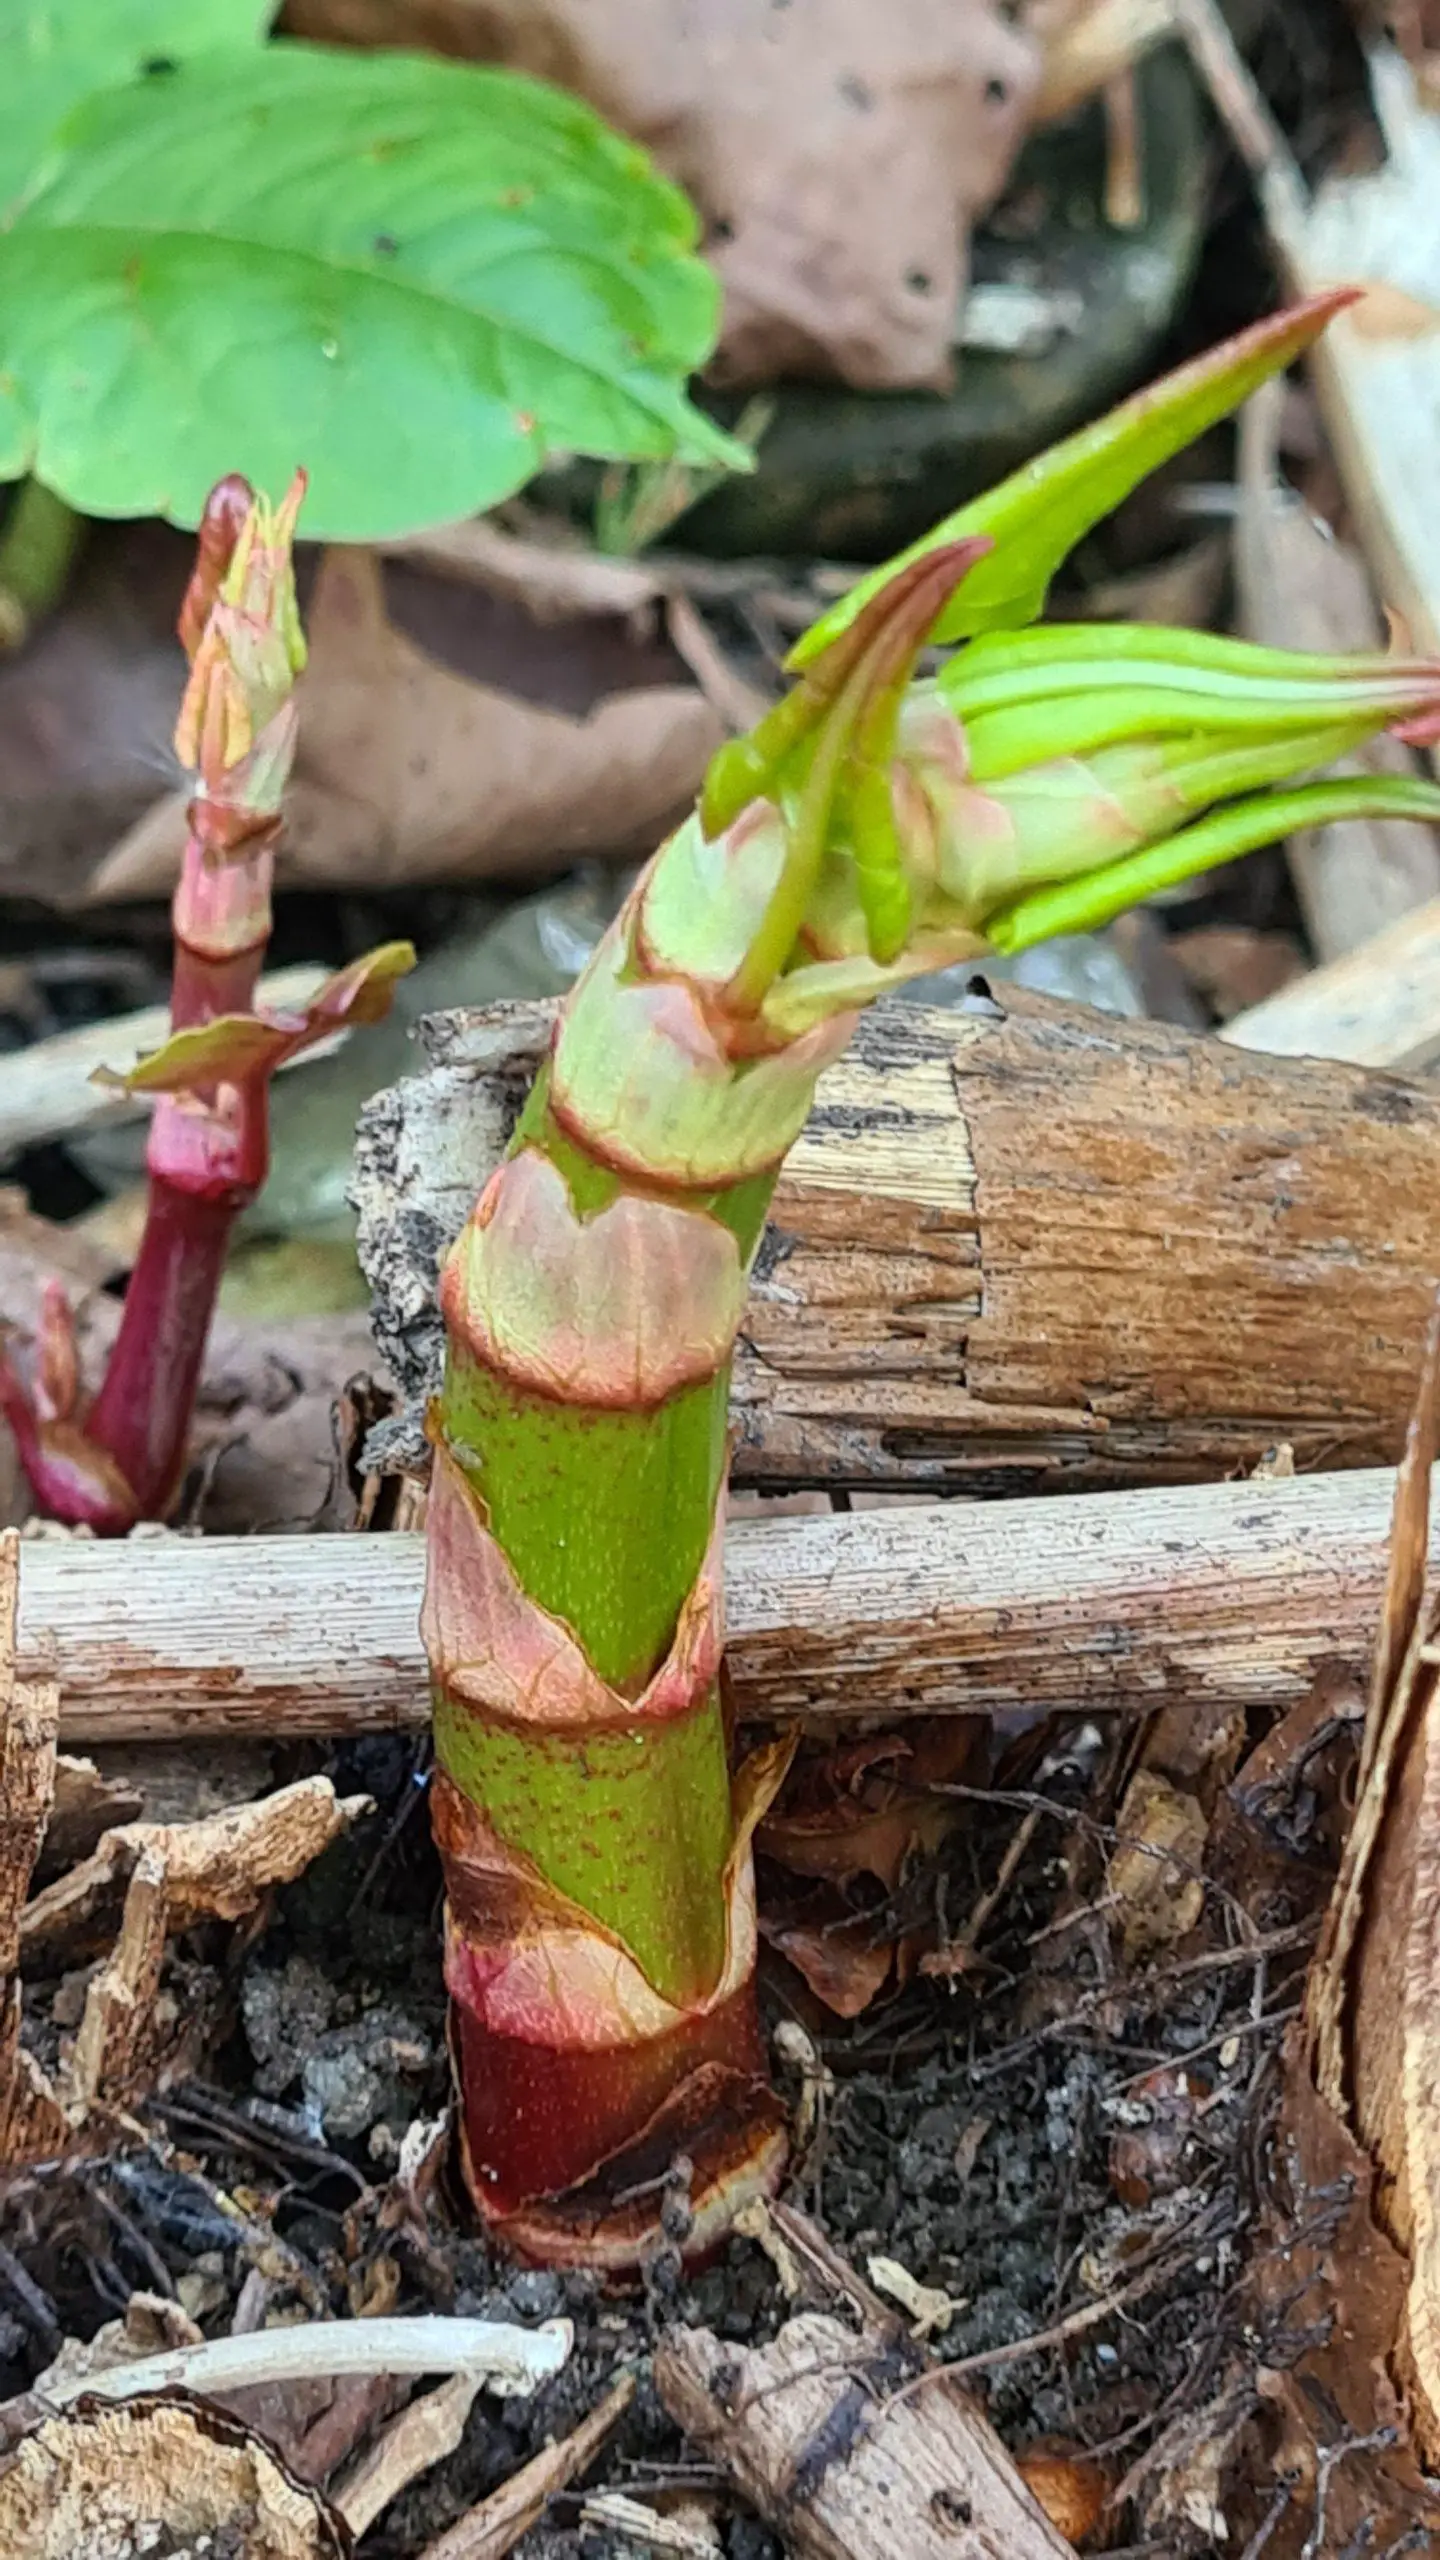 Identifying Japanese knotweed early on after the buds have opened up to reveal tips stems that grow several feet in height